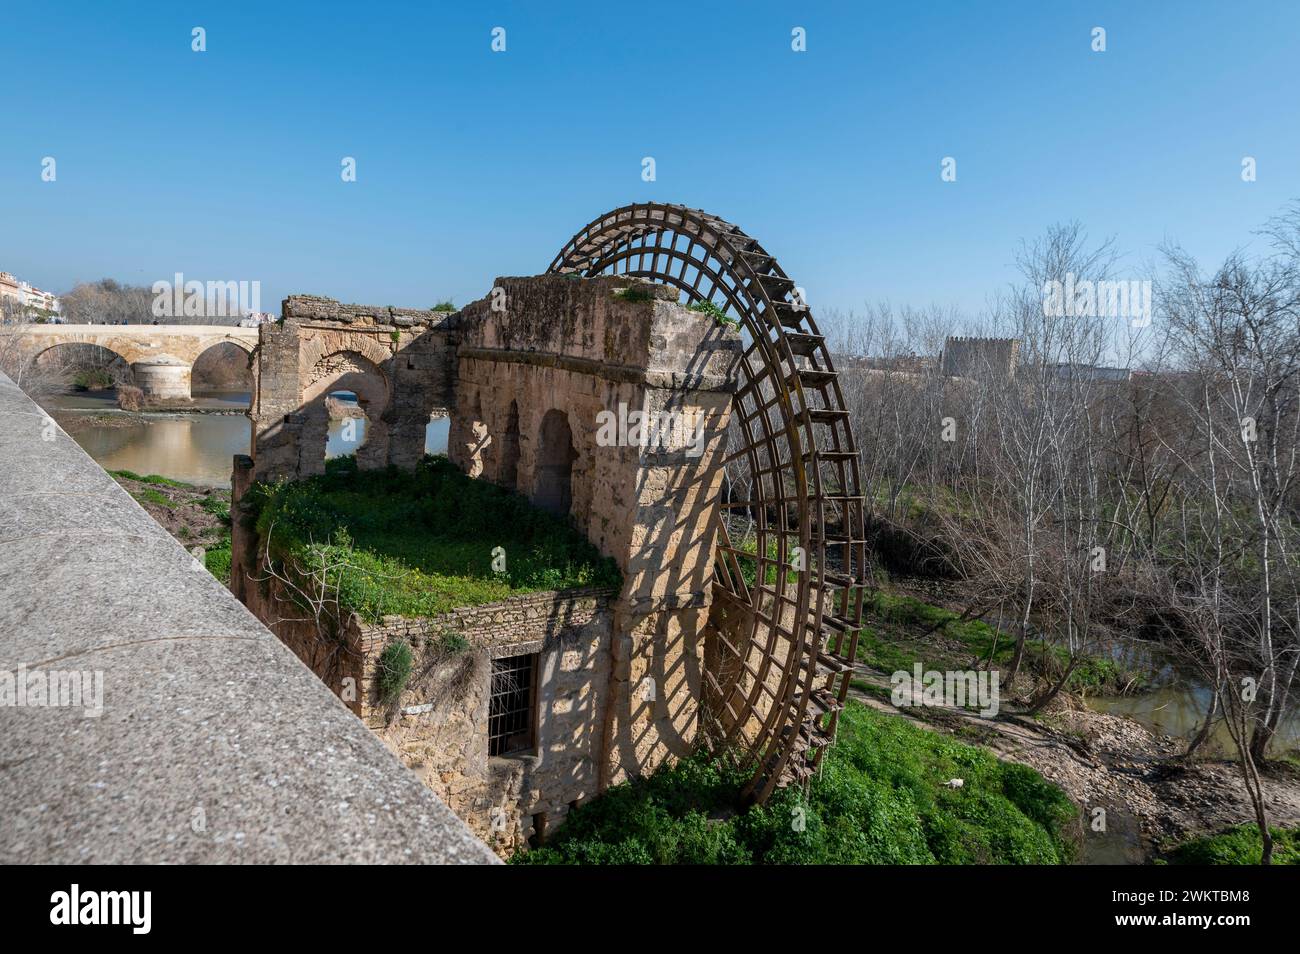 A large disused medieval wooden structured water wheel known as the Molino de la Albolafia on the banks of the Guadalquivir River and near the Roman b Stock Photo